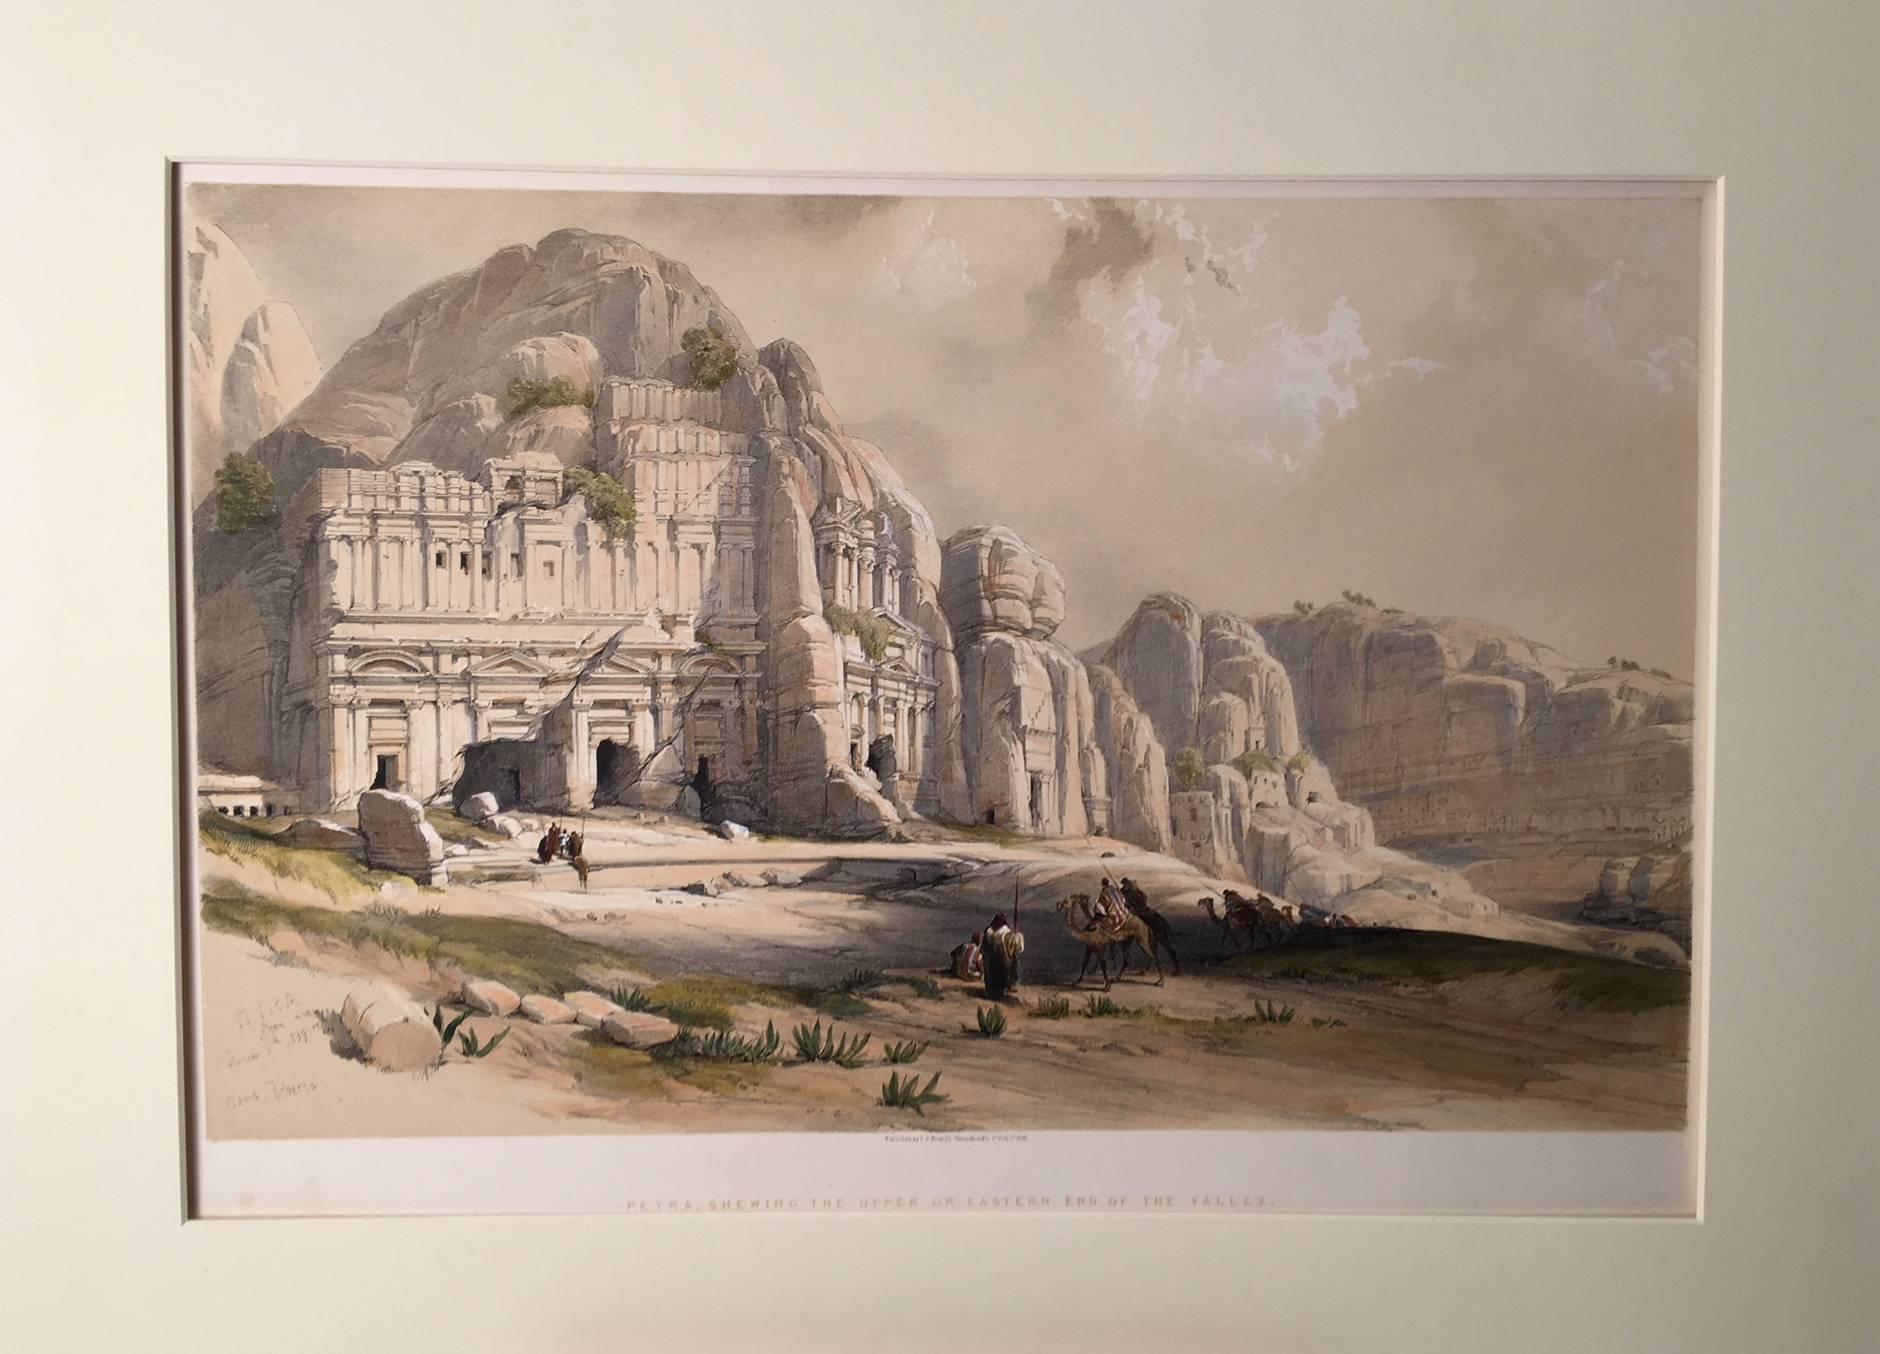 Petra Shewing the Upper or Eastern End of the Valley - Print by David Roberts